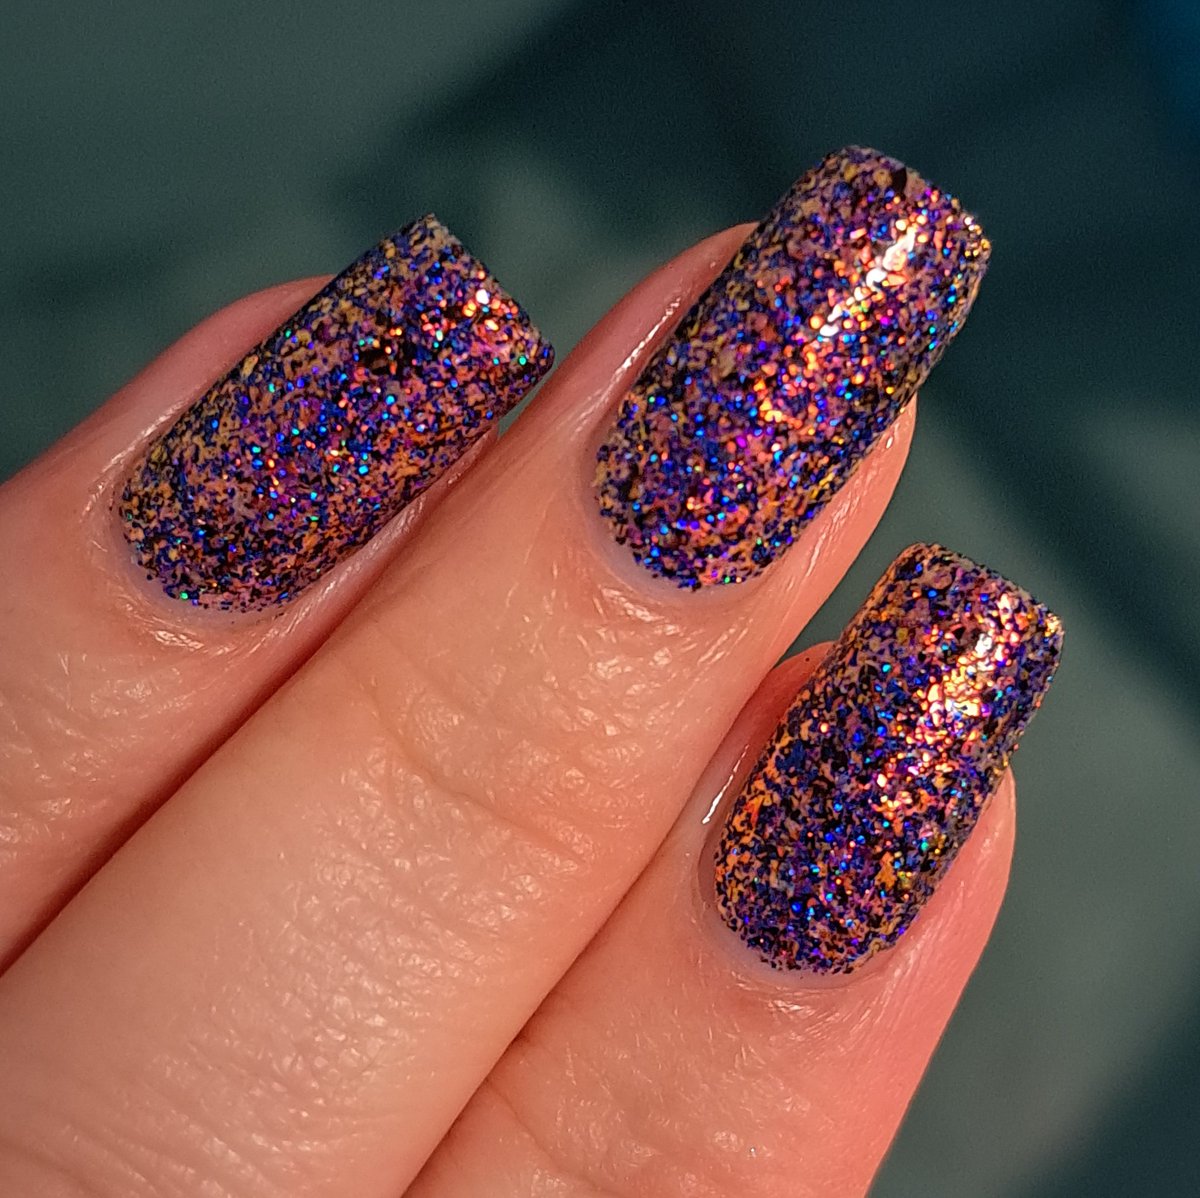 This week's polish: Autumn Reflections from #RogueLacquer is a copper to orange to gold flakey with sapphire holographic glitters in a clear base. 💅💛🧡💙✨️ #nailpolishaddict #givemesparkles